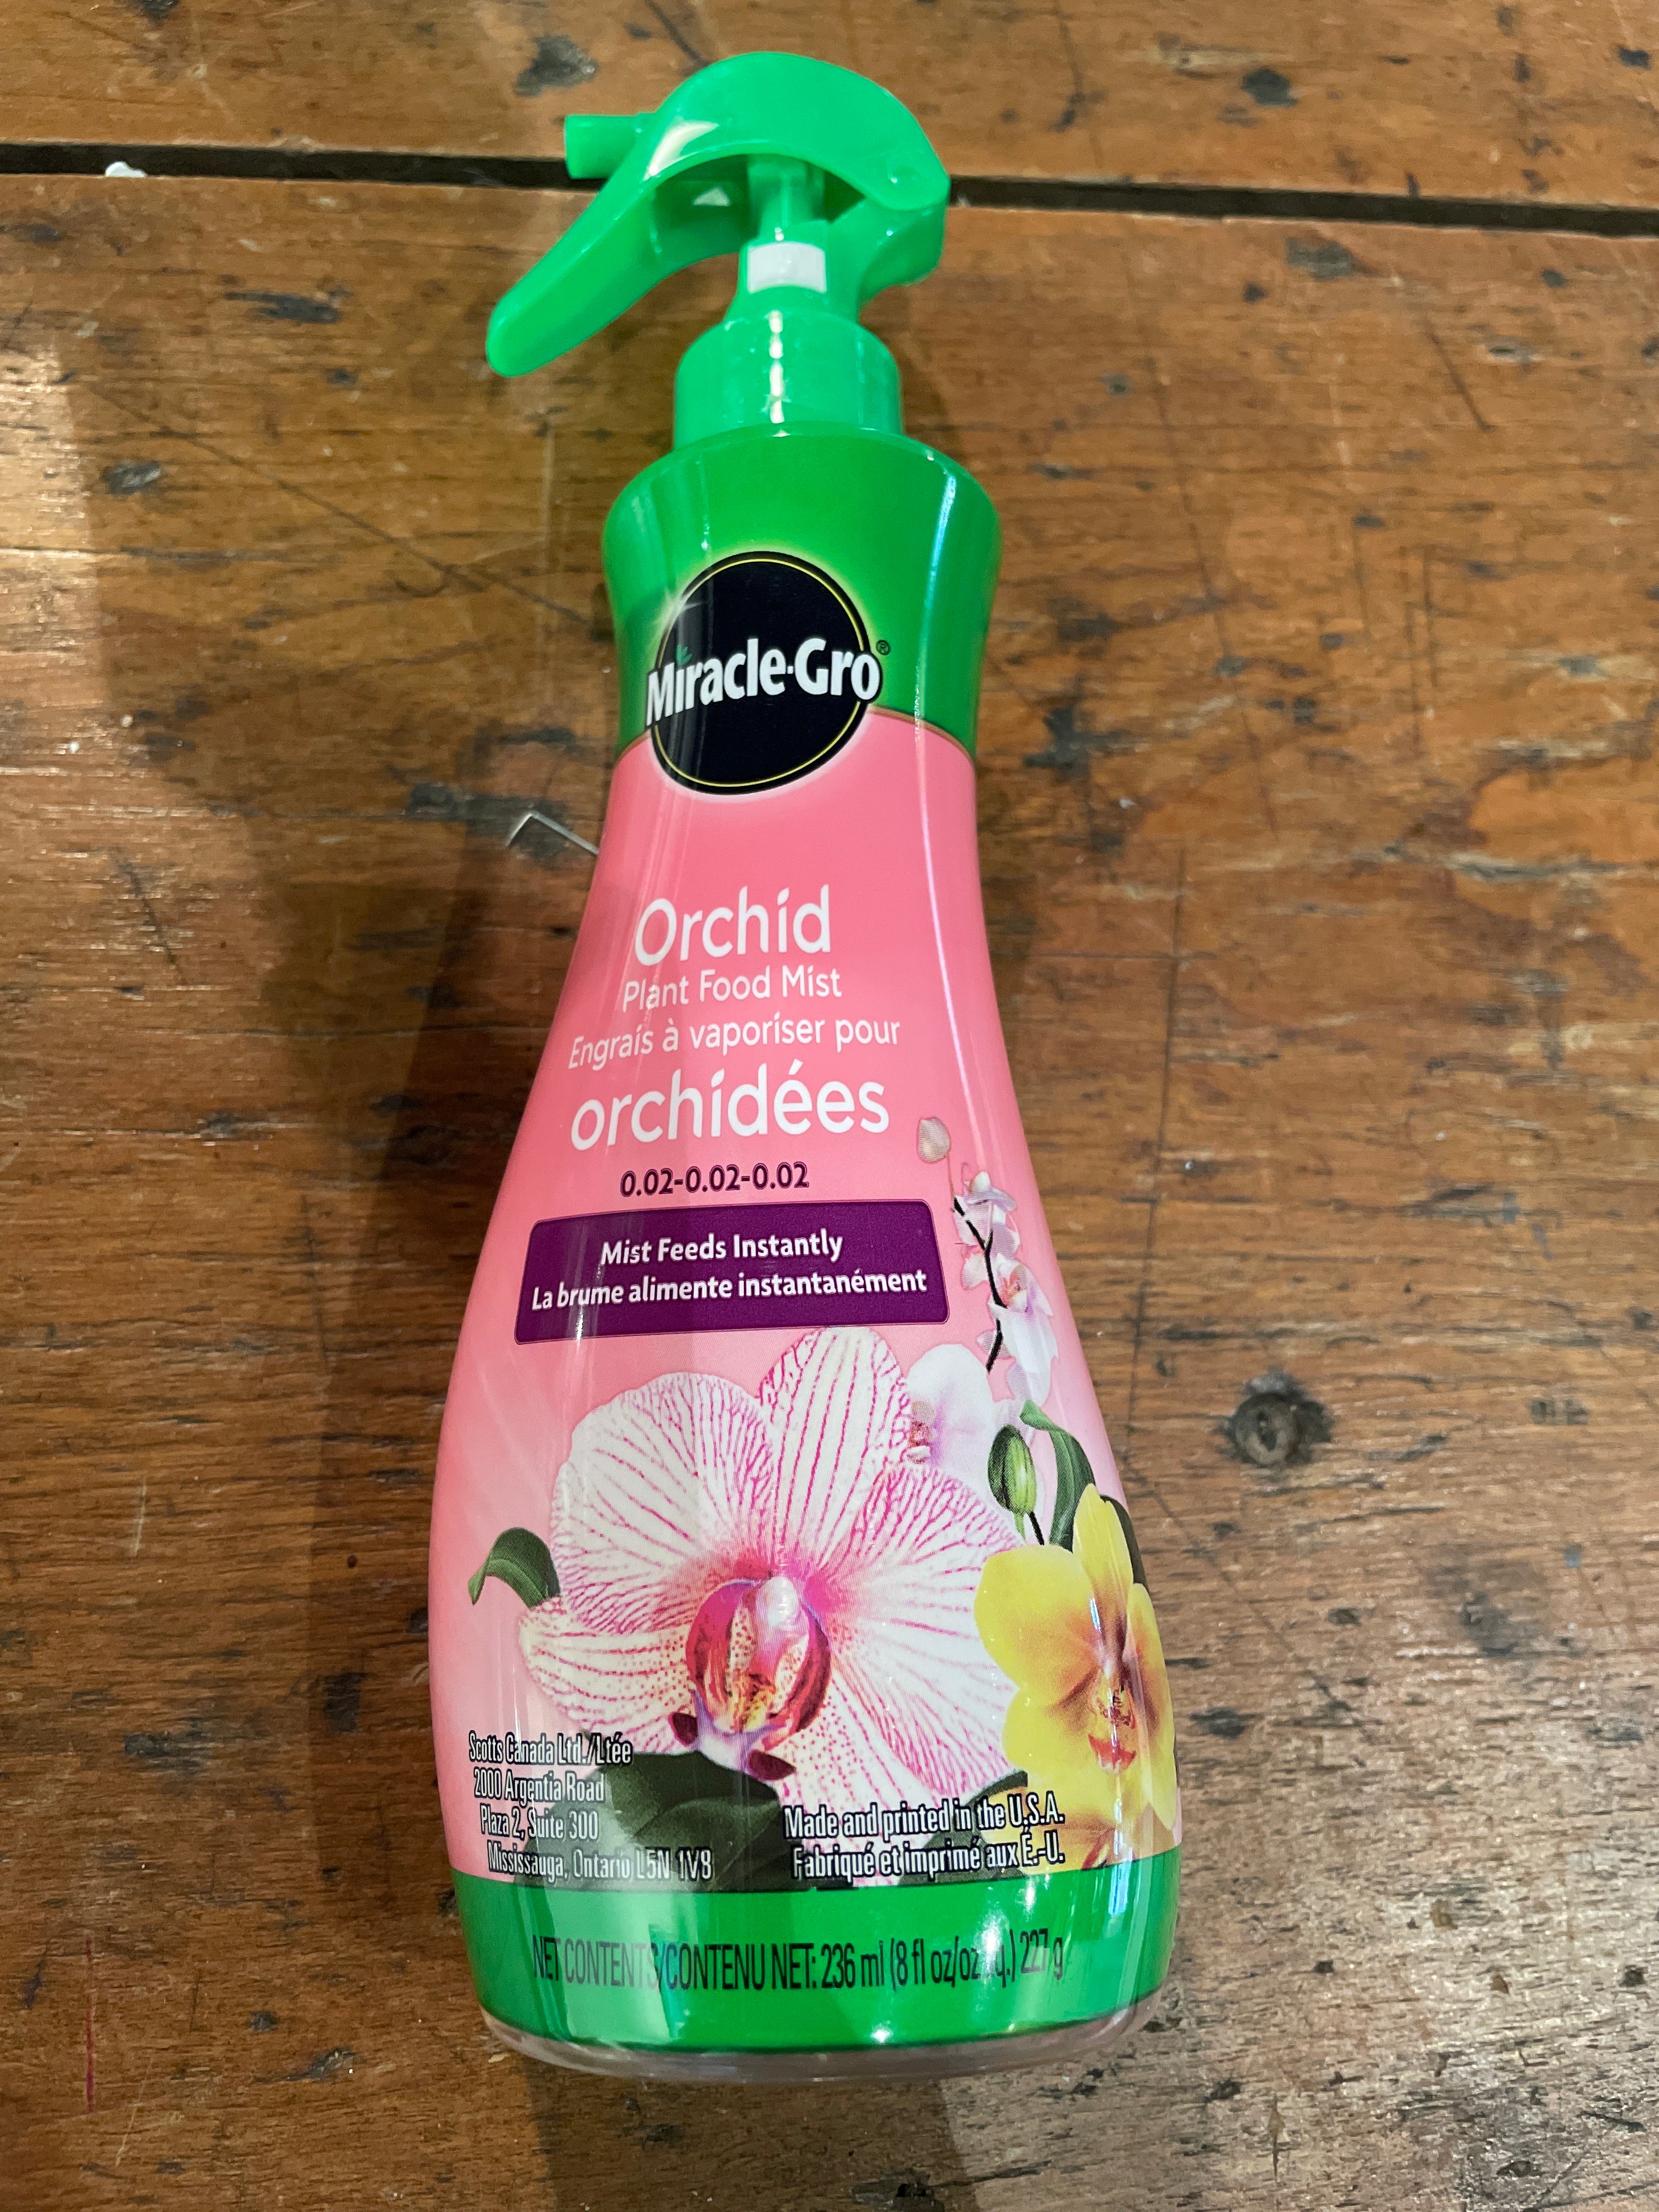 Miracle-Gro orchid plant food